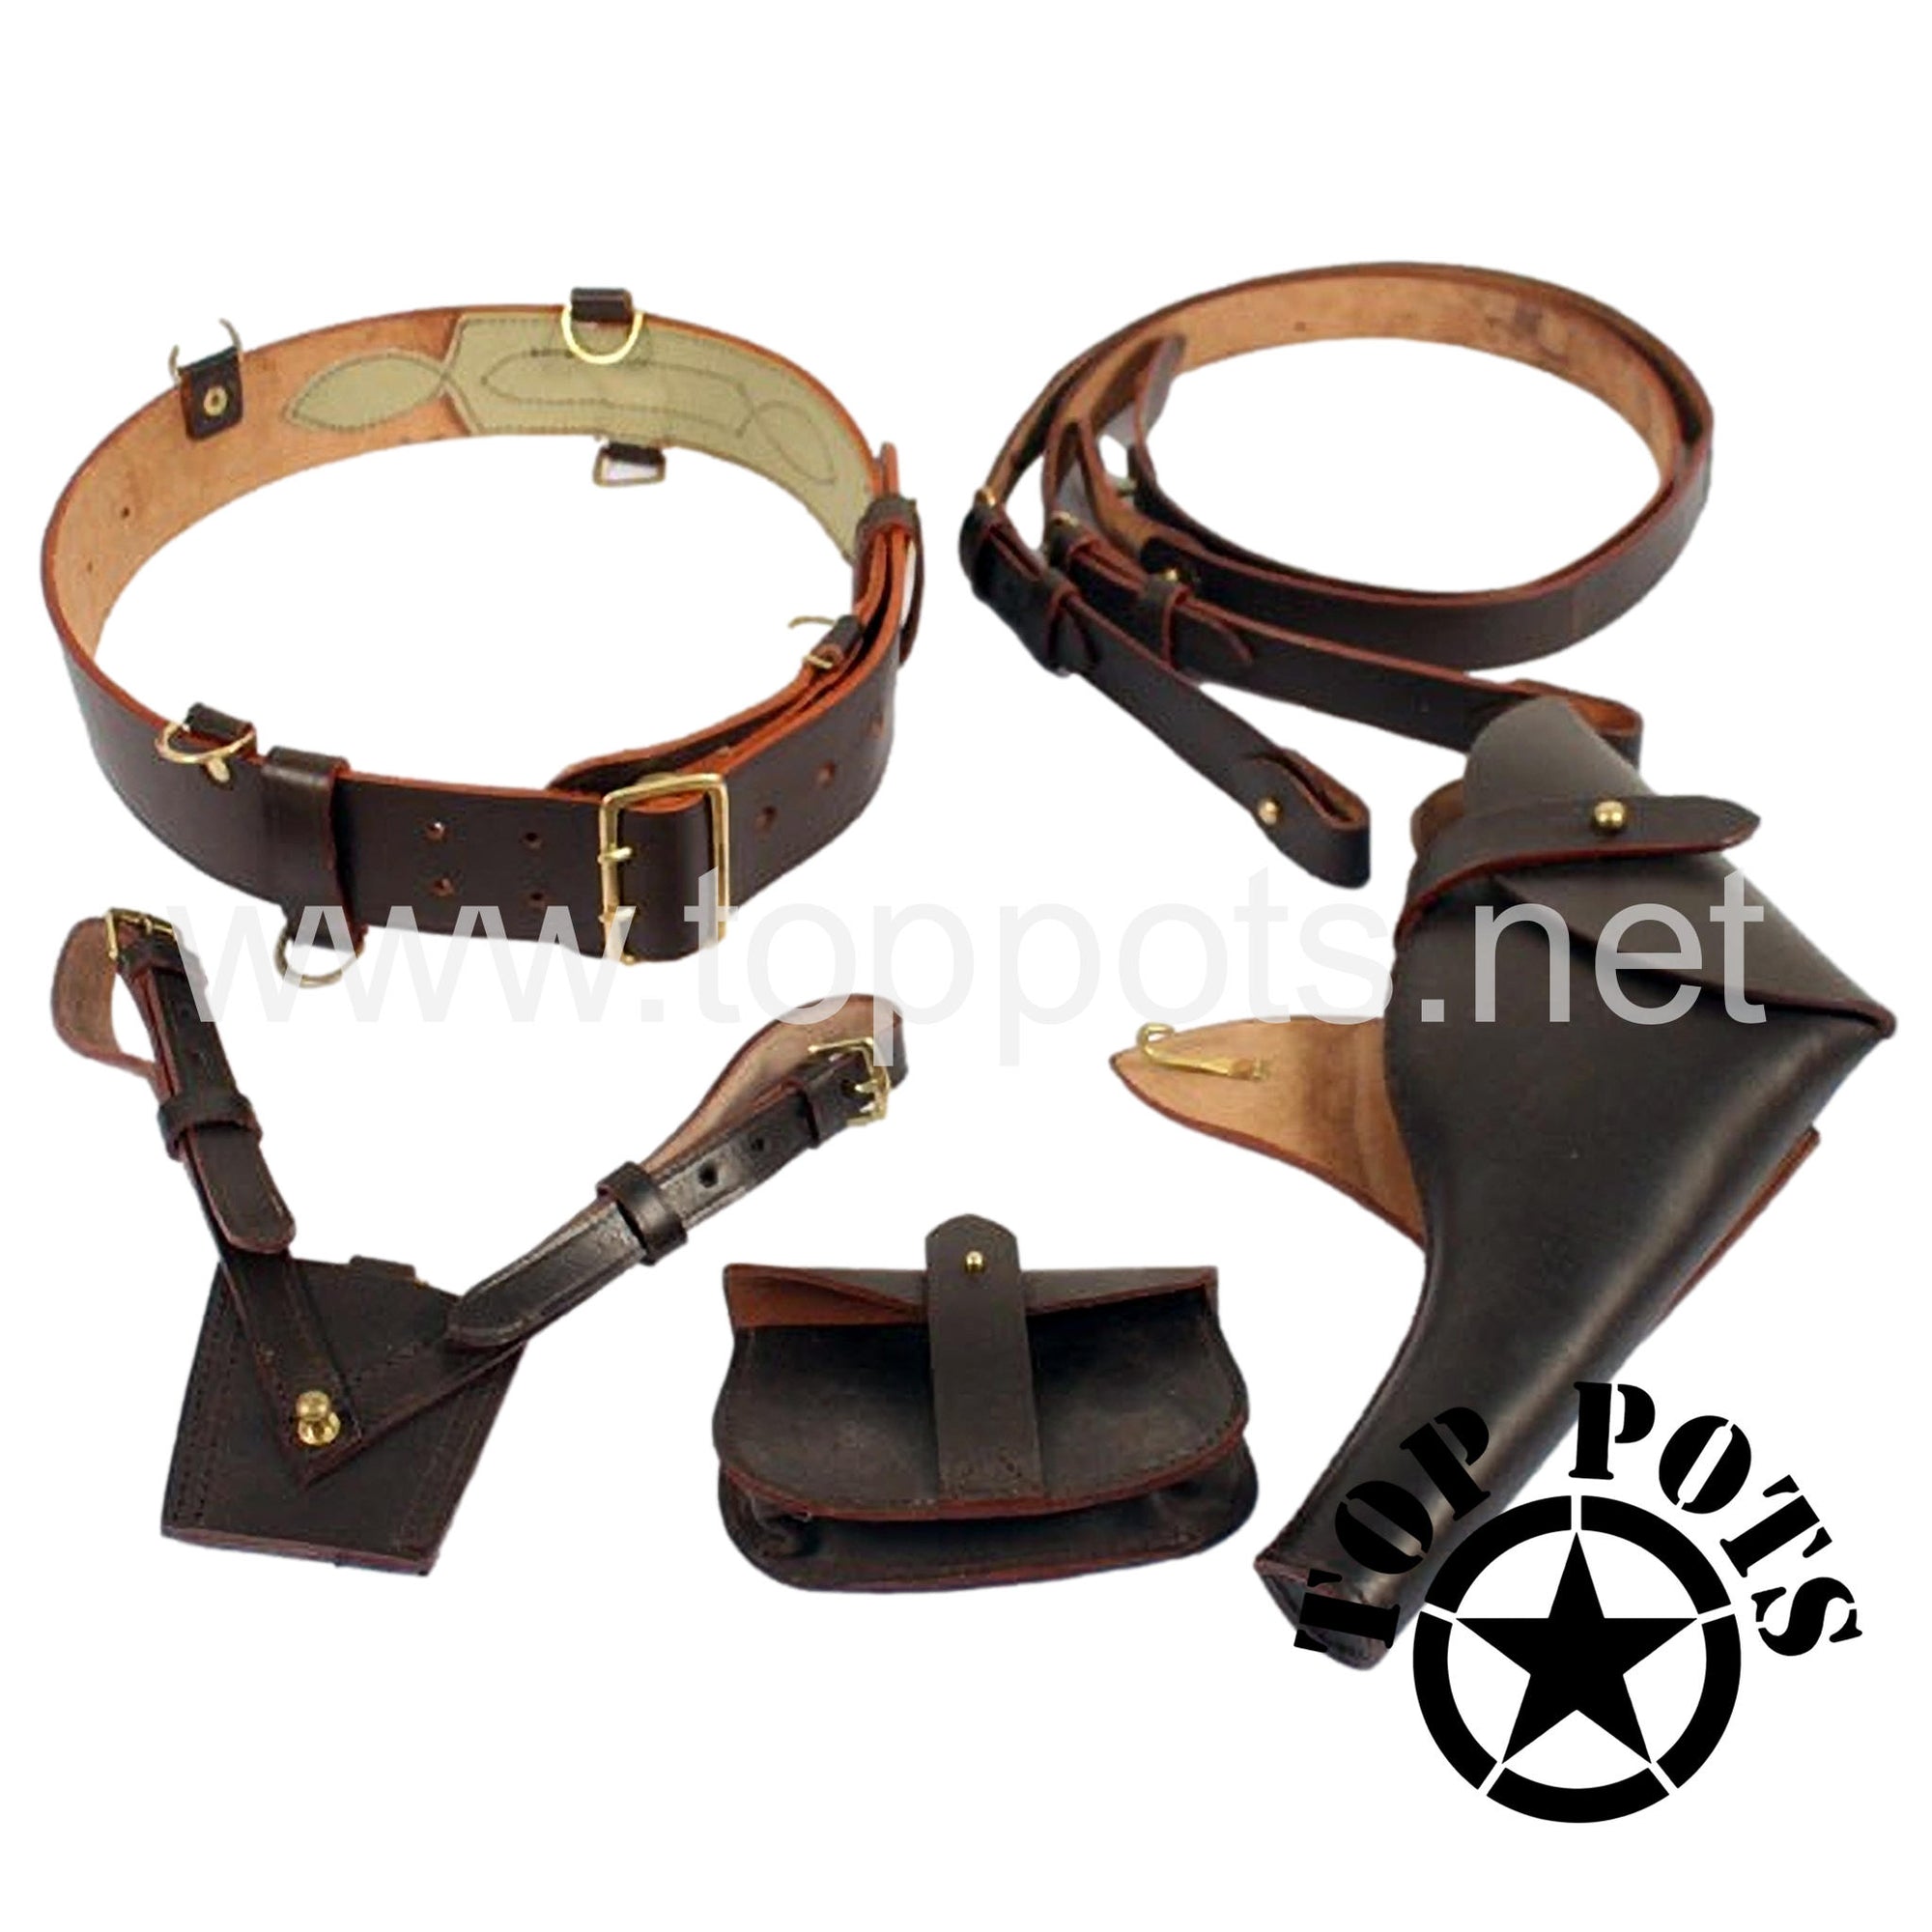 WWI British Army Reproduction Leather British Officer Sam Browne Belt – Complete Set